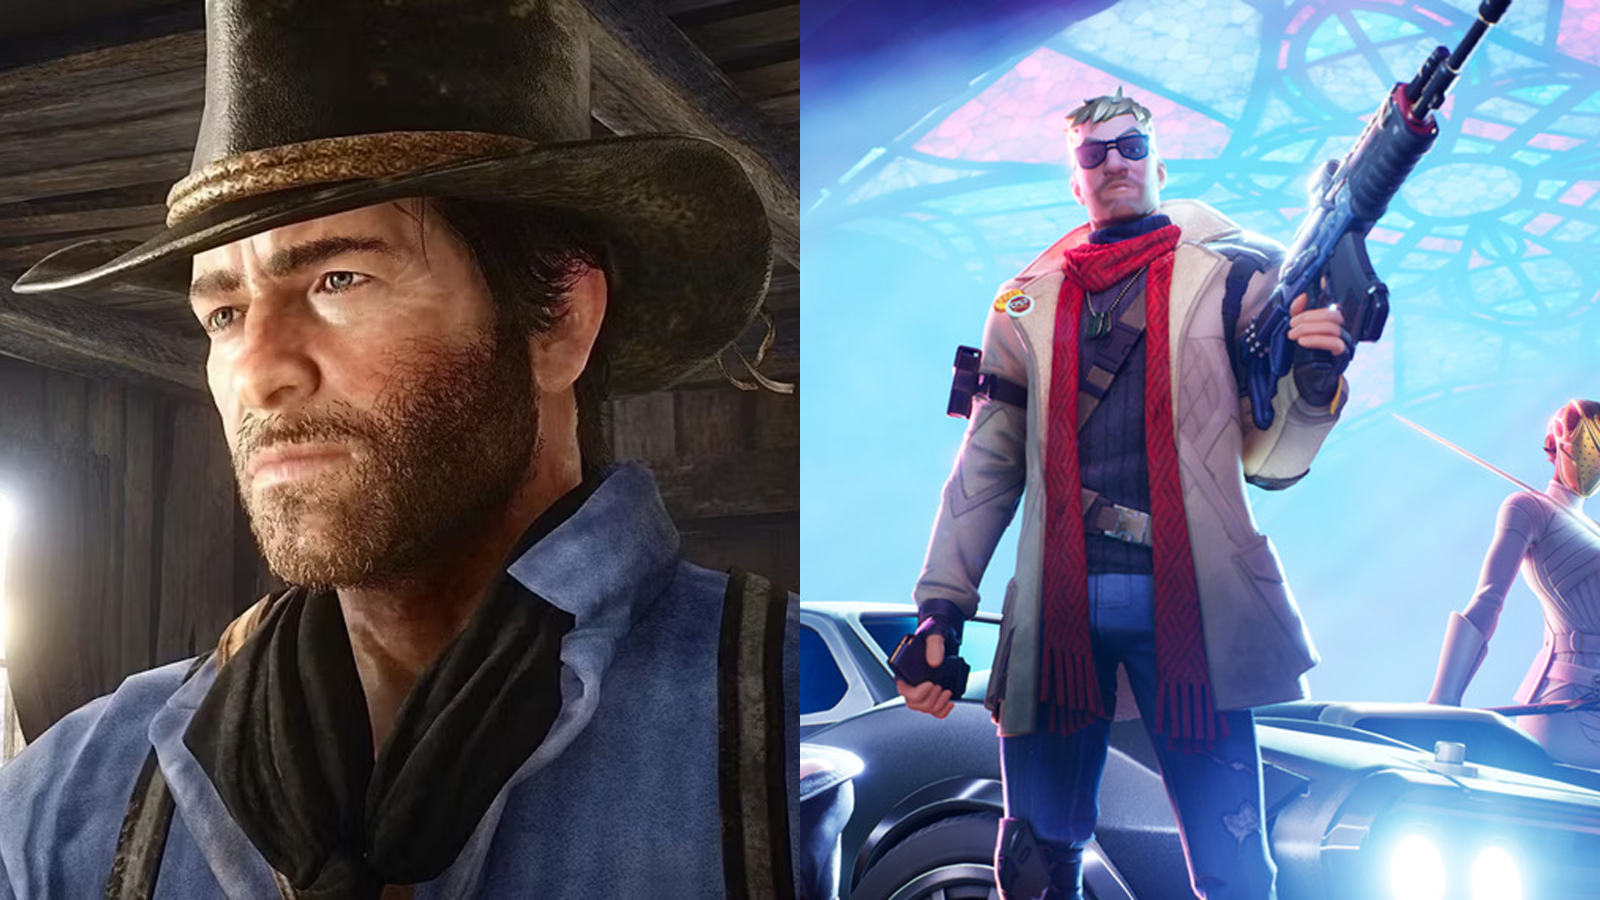 Fortnite players want excellent Arthur Morgan RDR2 skin to be added -  Dexerto